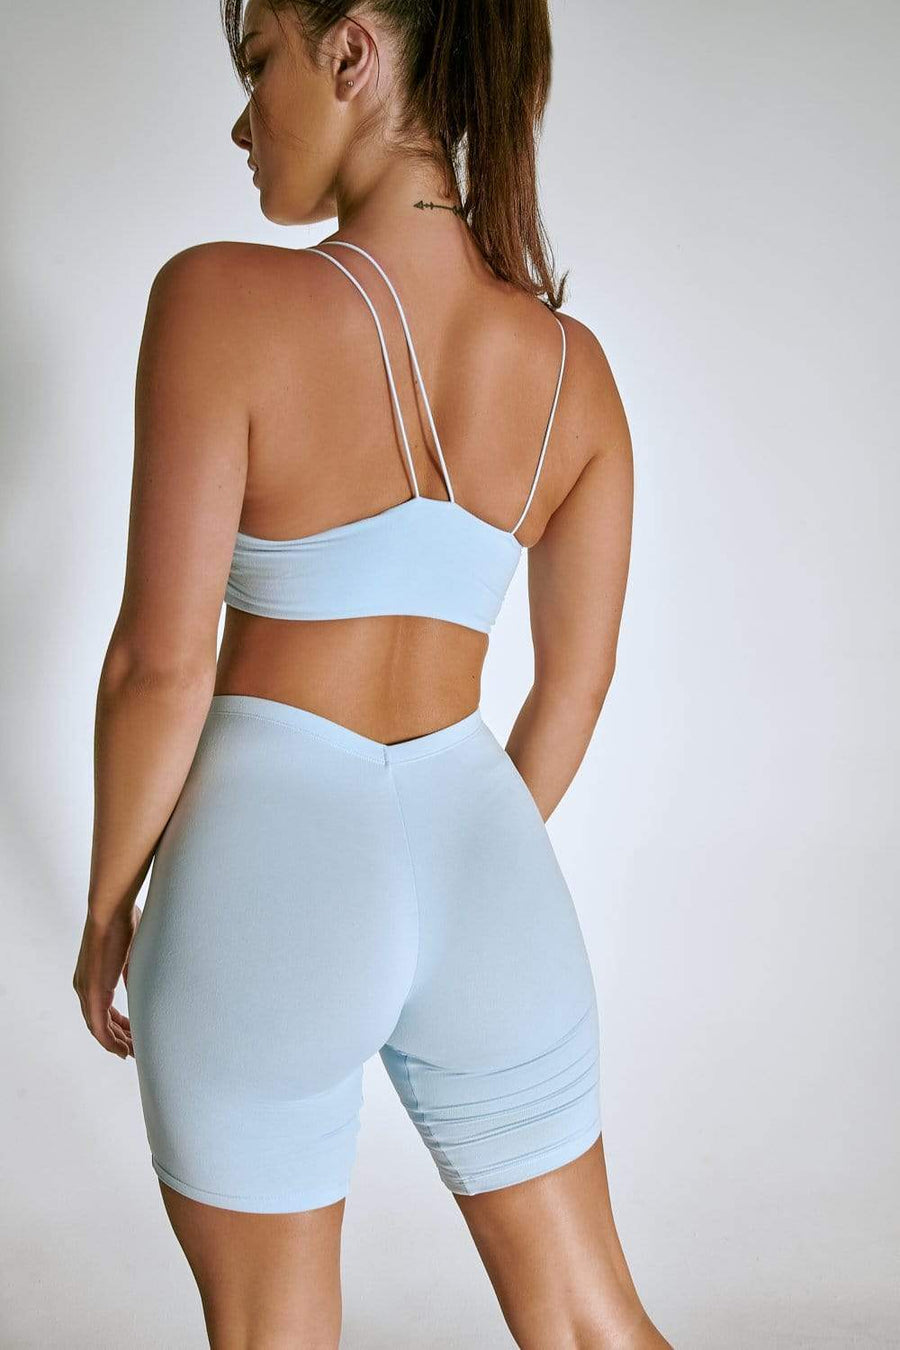 LuxLounge One Shoulder Illusion Top - Baby Blue Top